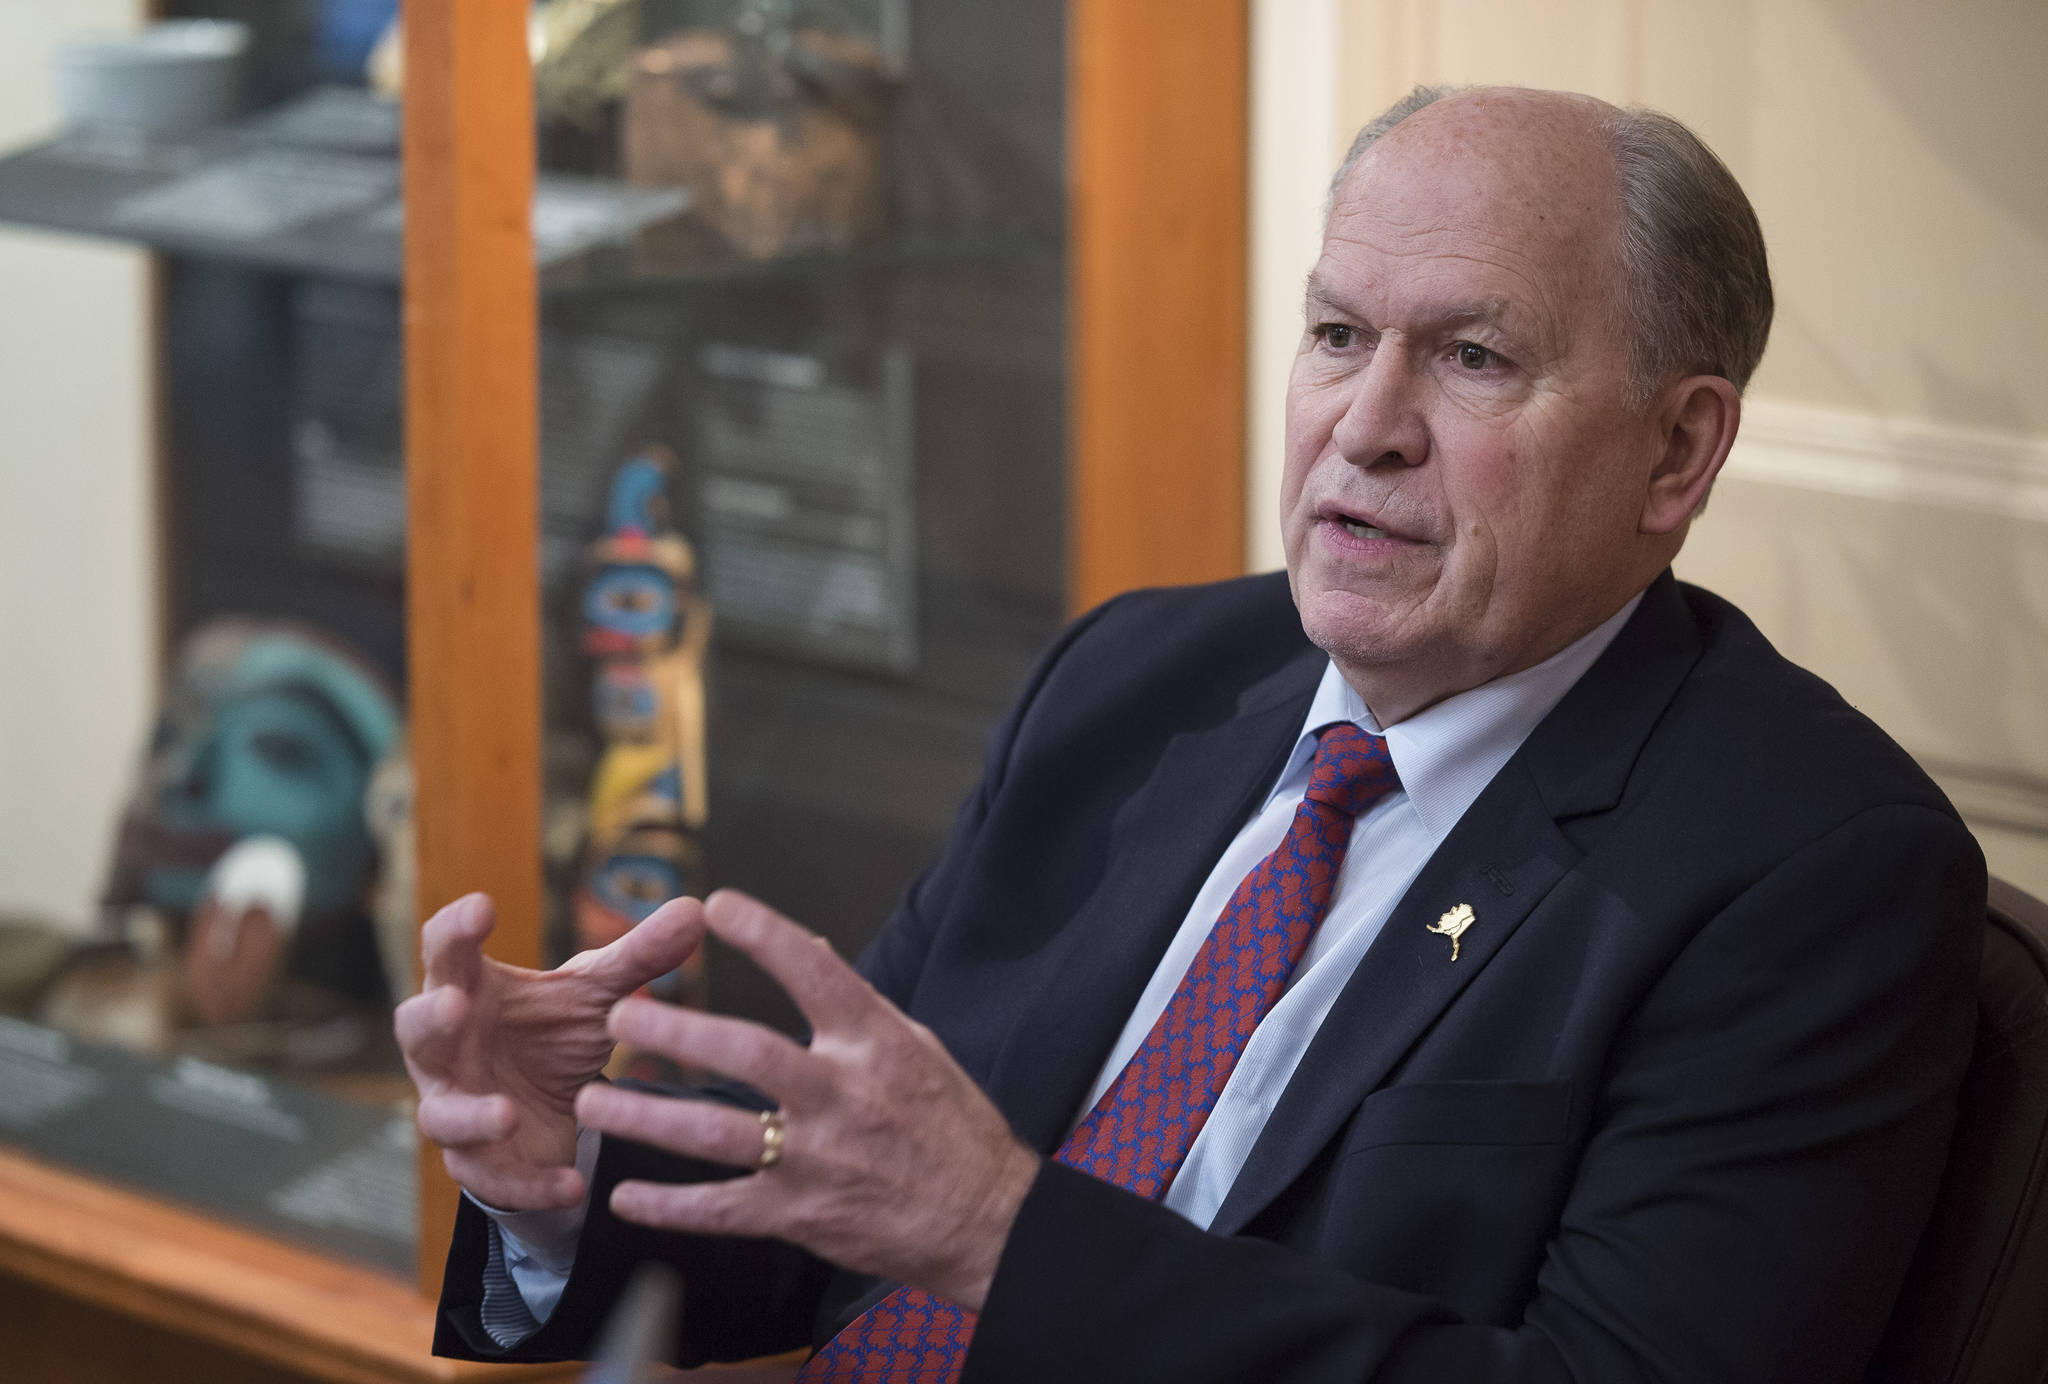 Gov. Bill Walker answers a range of questions during an interview with the Empire in his Capitol office on Friday, Jan. 5, 2018. (Michael Penn | Juneau Empire)